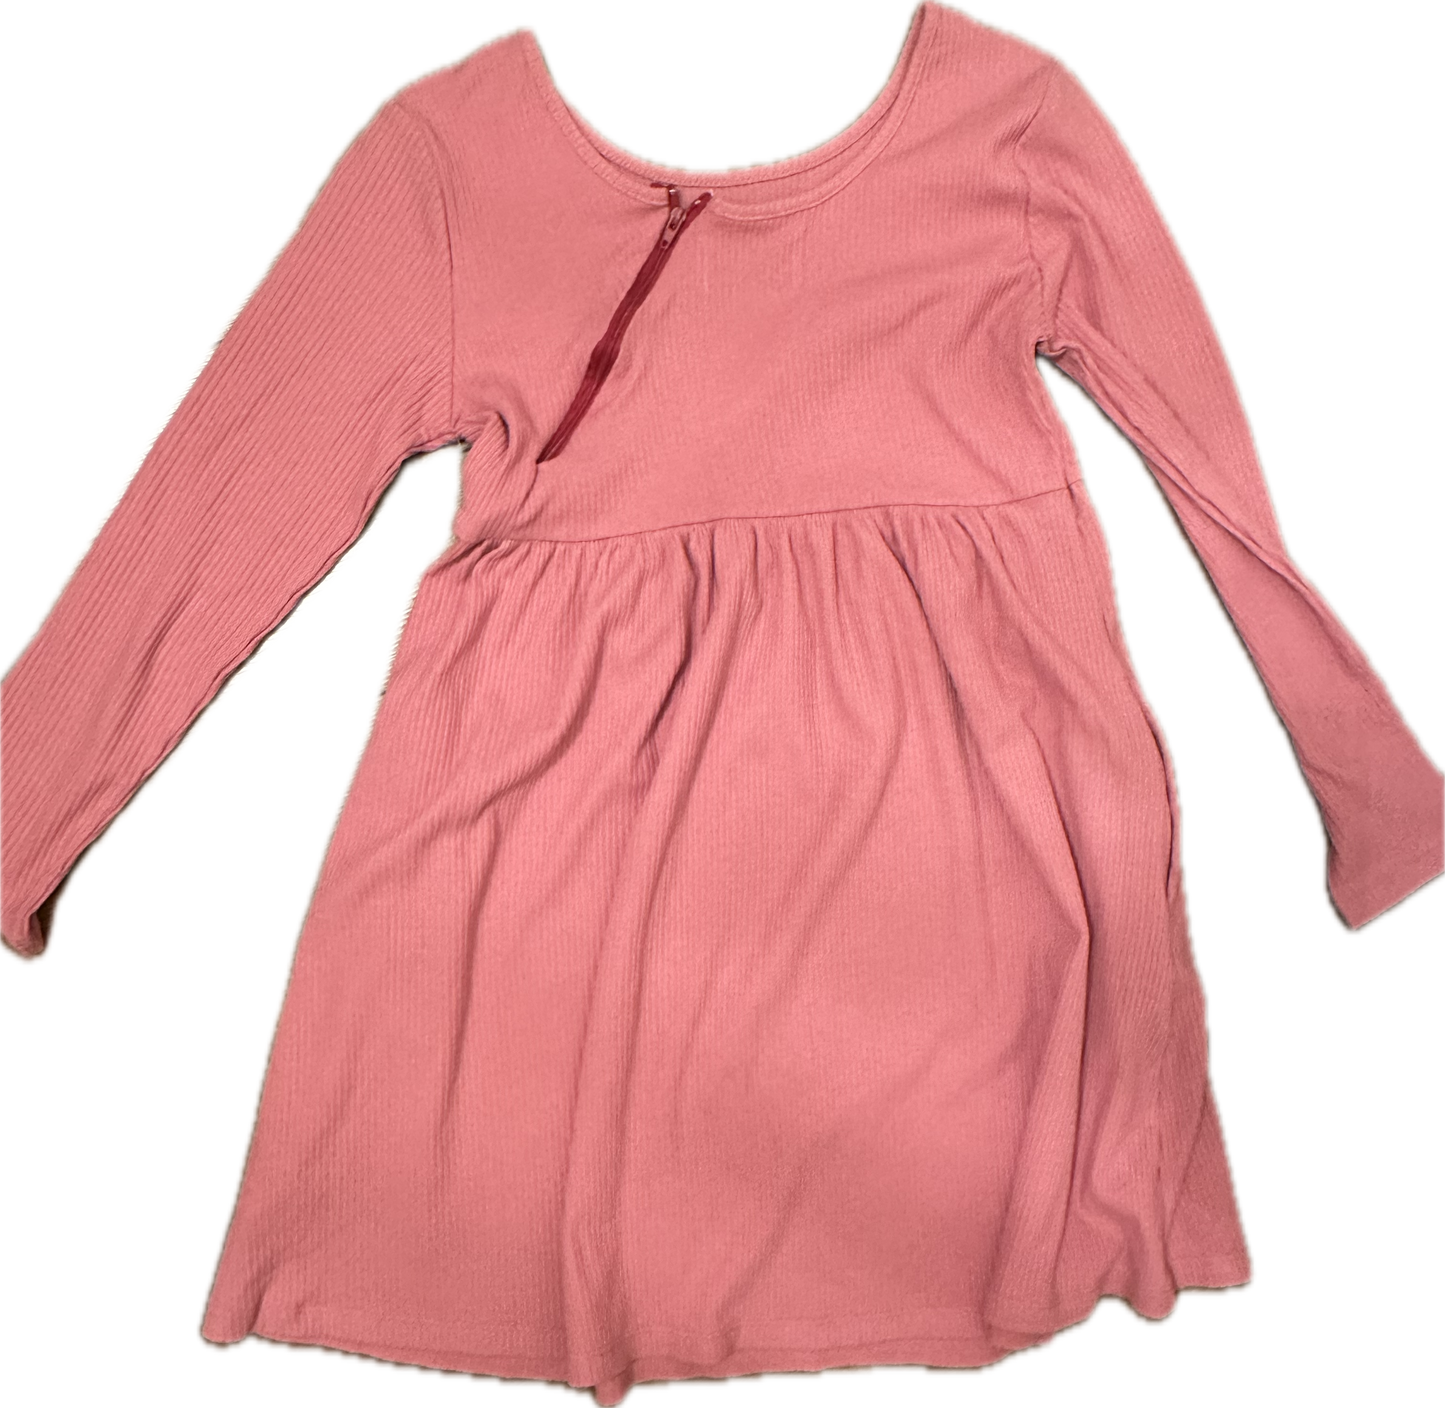 IMPERFECT Pink Dress Size 8